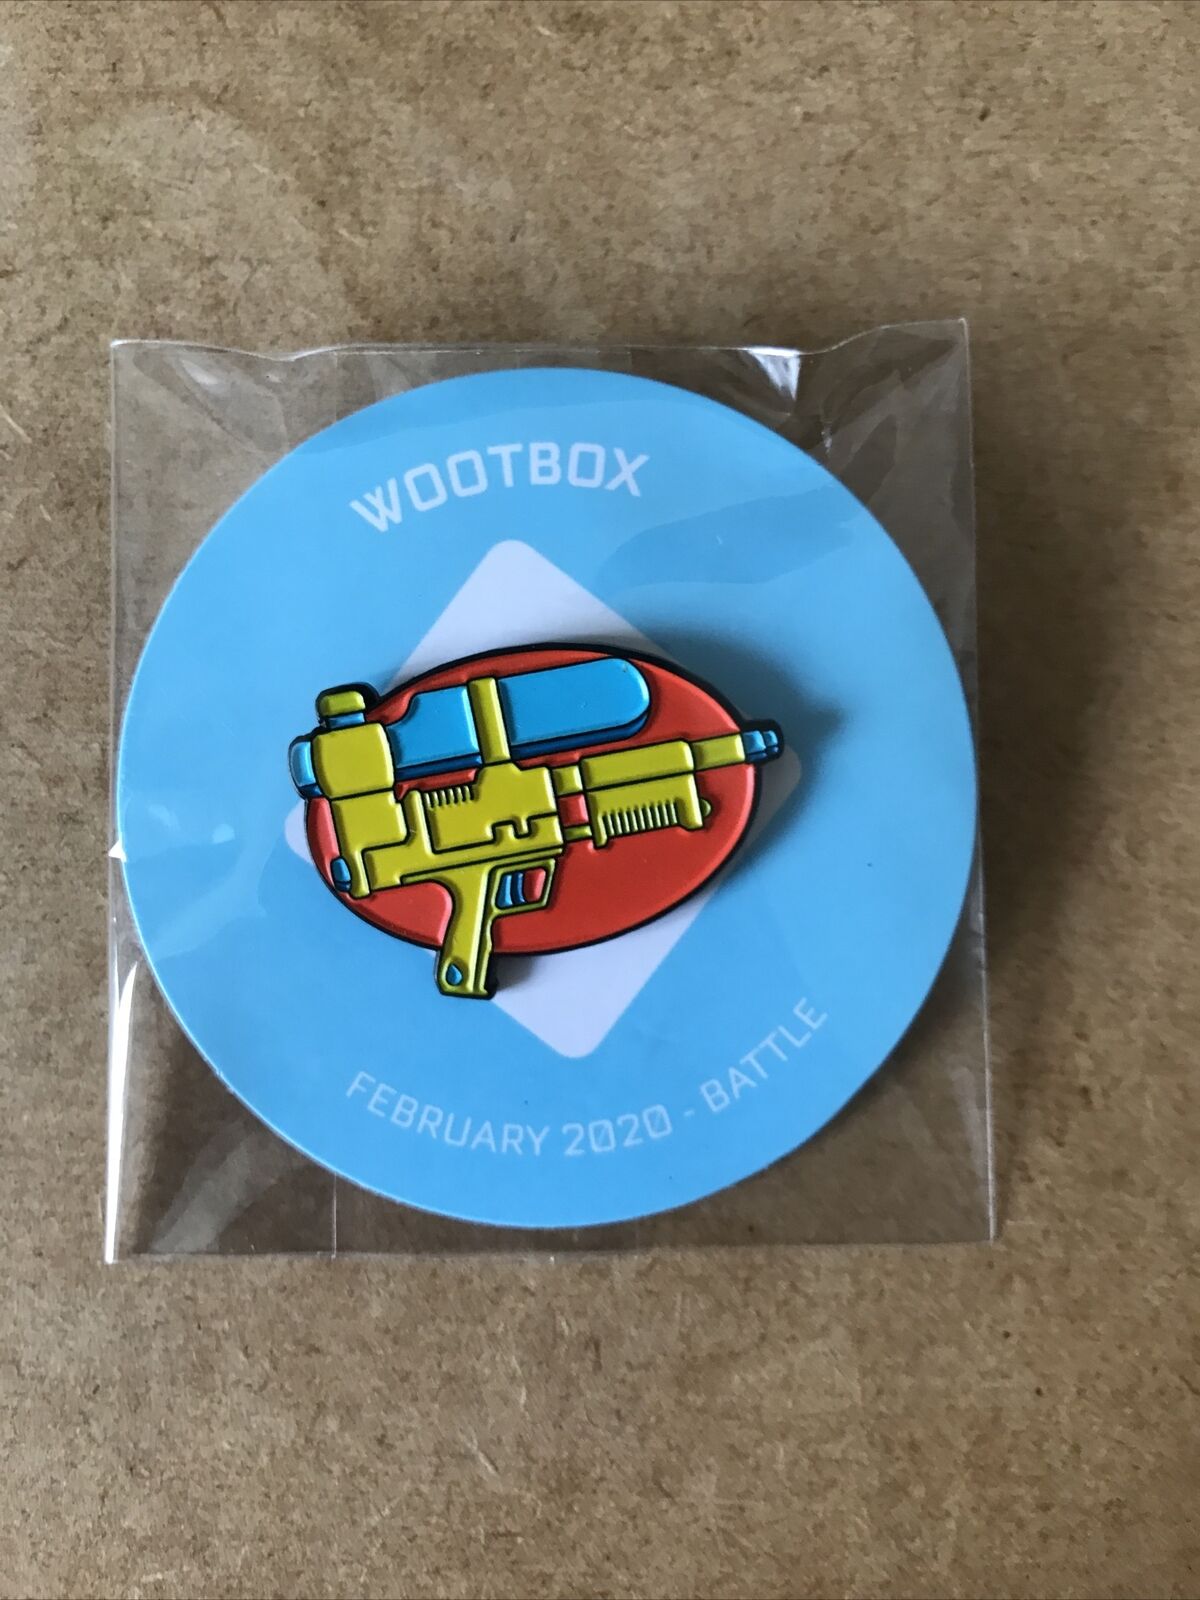 Wootbox February 2020 Battle Water Pistol Collectors Pin New Sealed